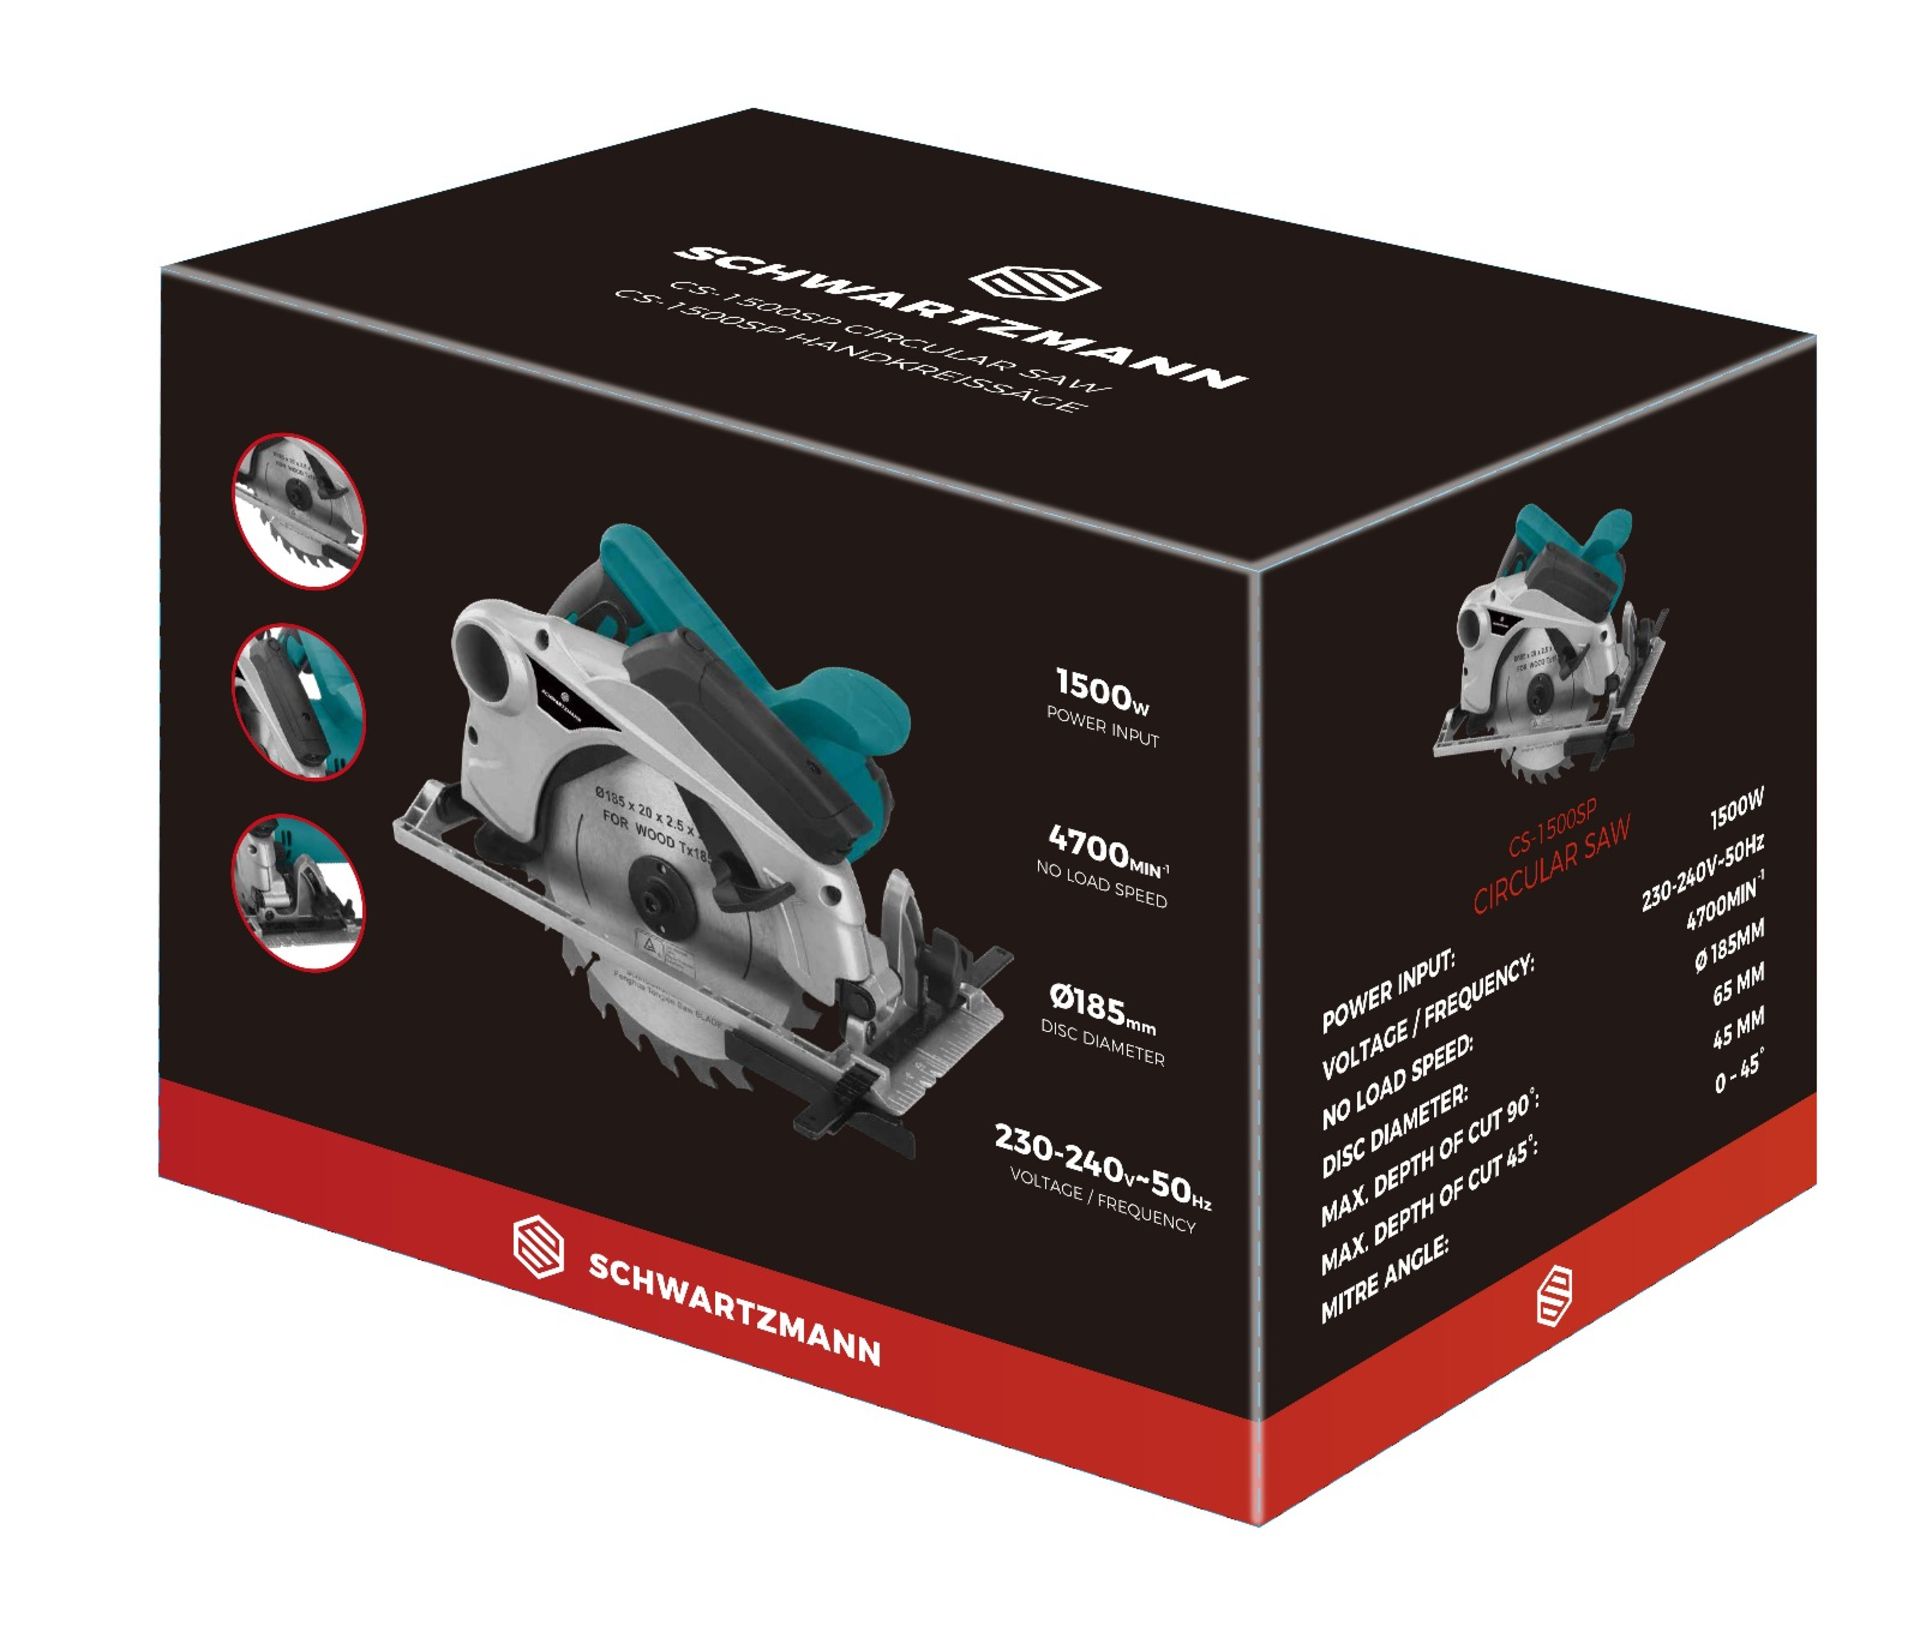 V Brand New 1500w CS1500SP Circular Saw With laser Guide - Dust Extraction - 185mm Disc Diameter -